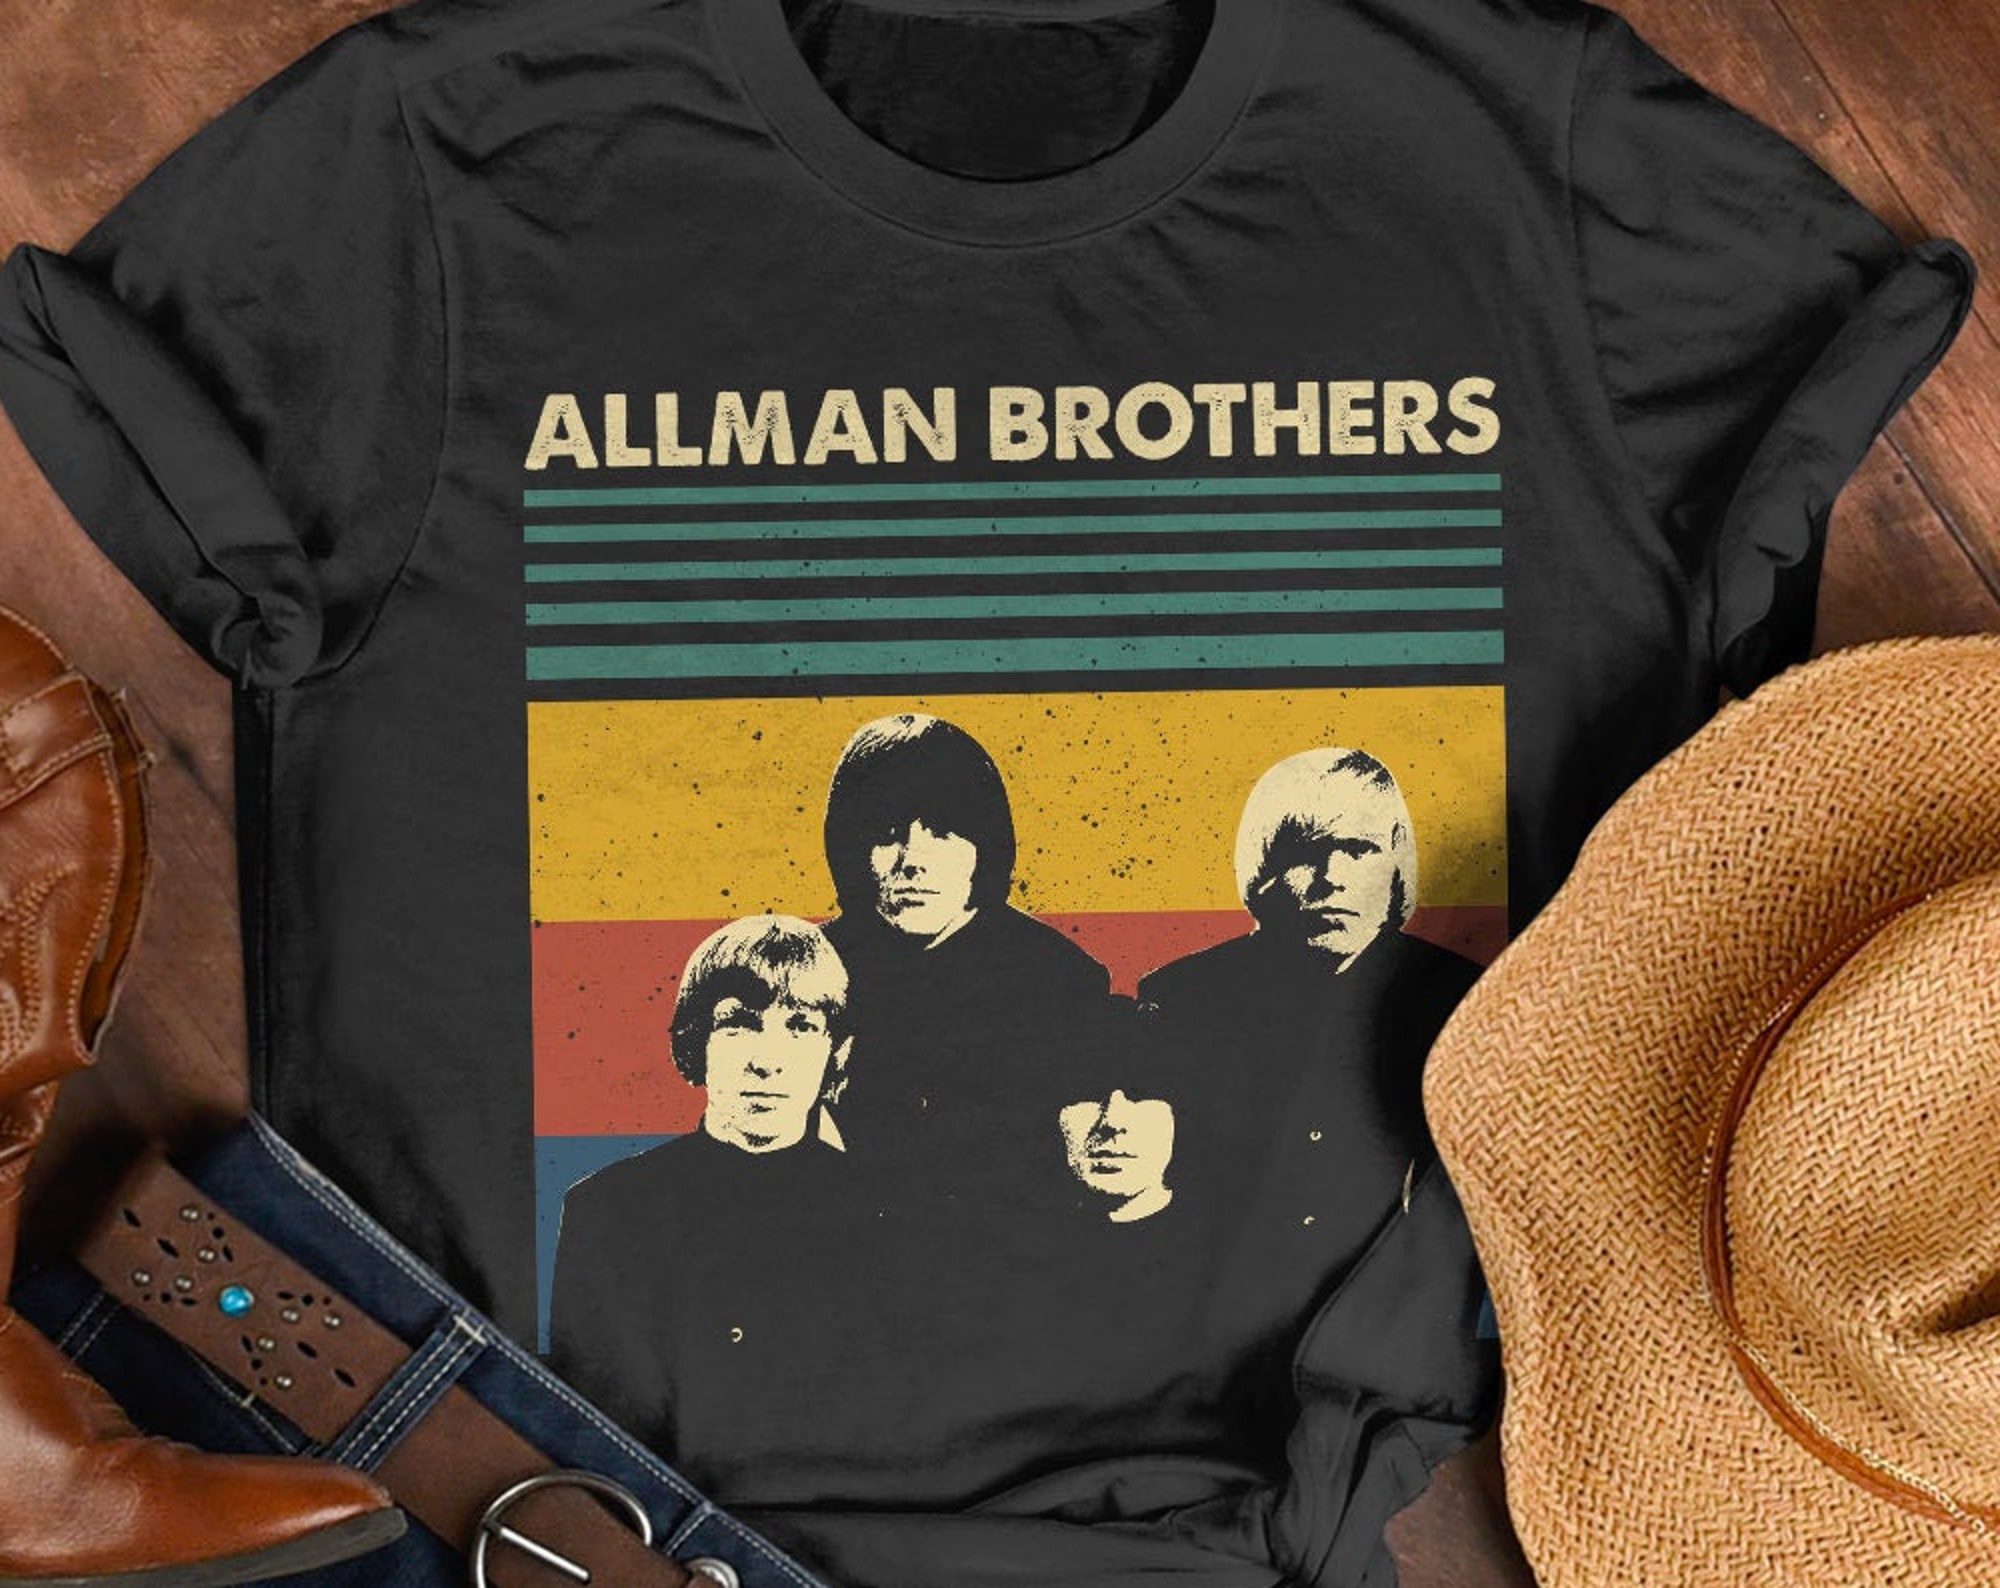 Discover Allman Brothers Retro Vintage T-Shirt, Allman Brothers Vintage Shirt Idea